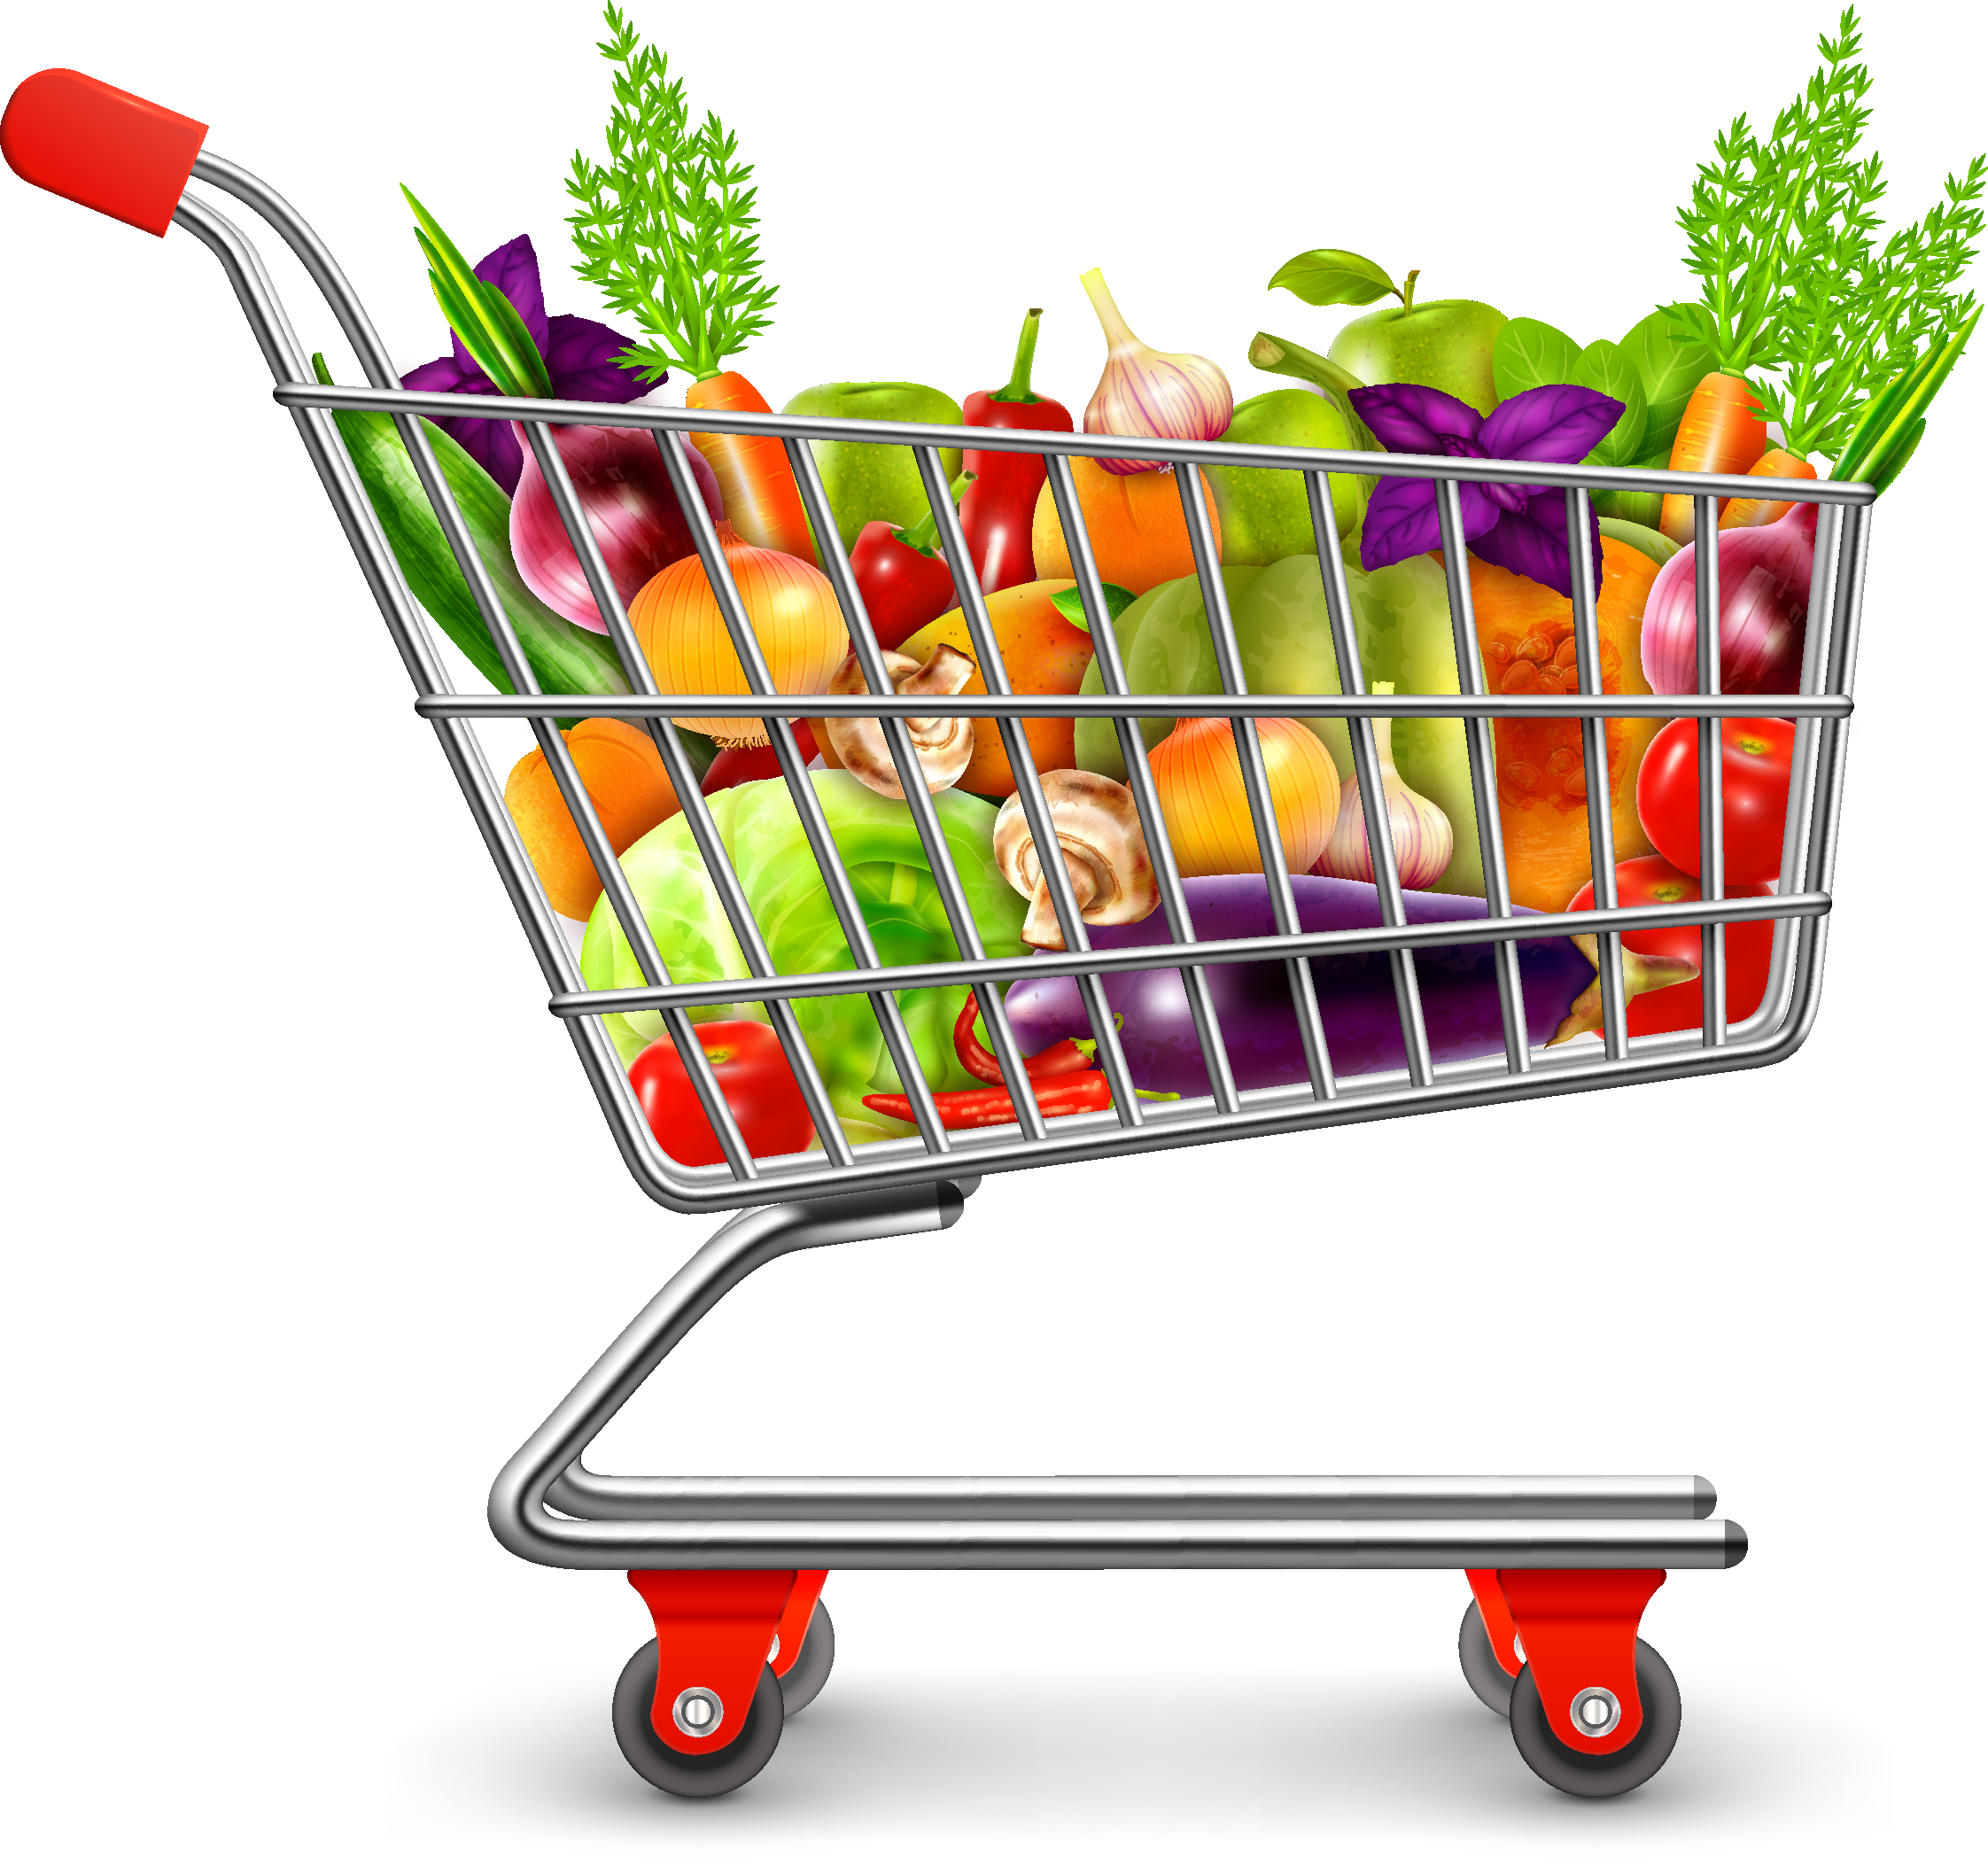 Grocery clipart trolley, Grocery trolley Transparent FREE for download